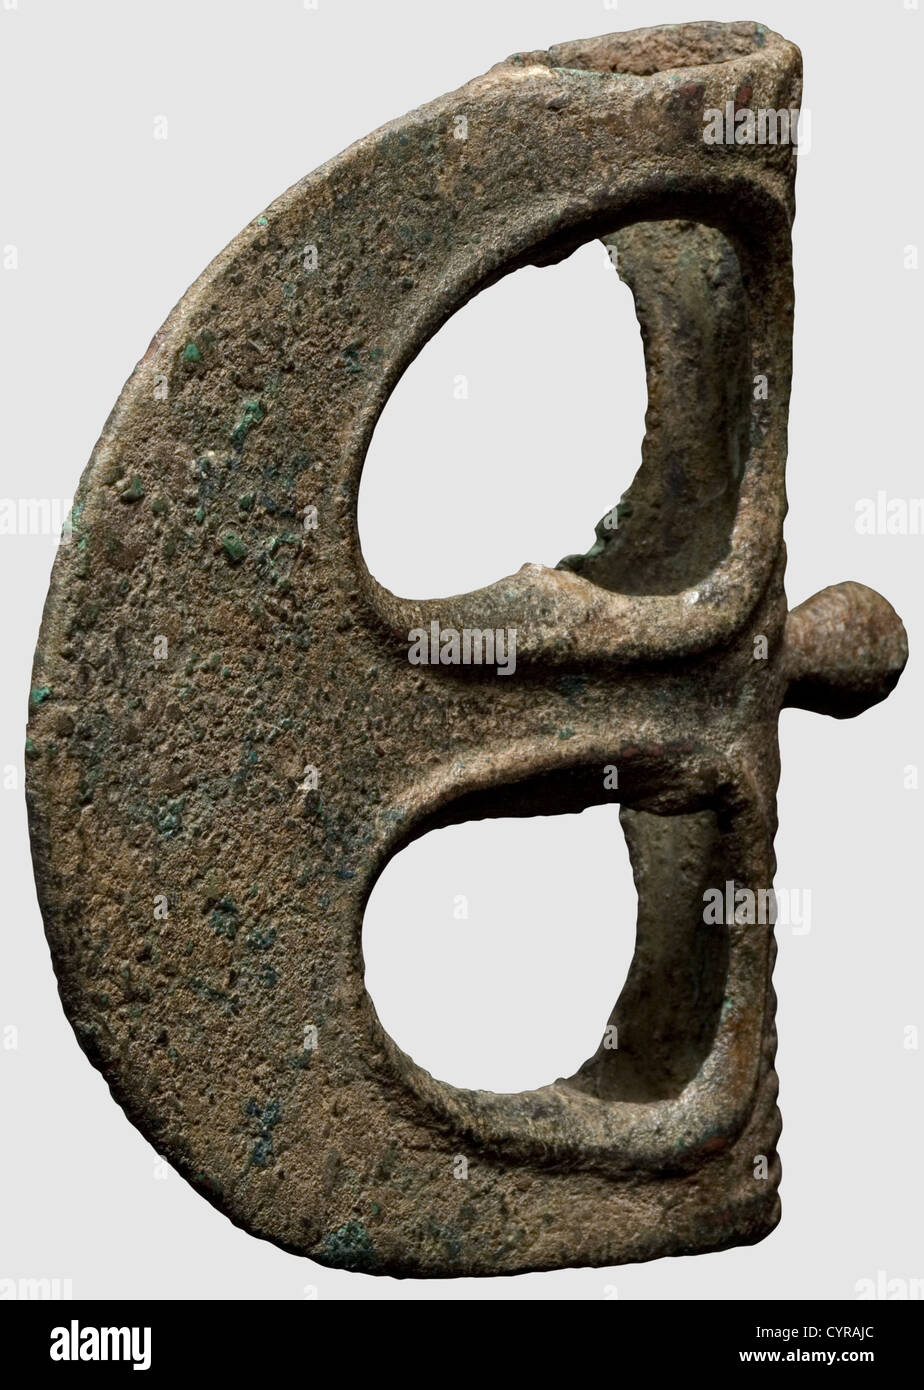 Four Ancient Near Eastern axes,circa 2nd millennium B.C. Bronze. Three crescentic axes,one fenestrated axe. Green,partially green-brown patina. Size of the crescentic axe with five mounting heads(AG 214)13.5 cm x 12.5 cm,the large crescentic axe with one mounting head(AG 215)13.5 cm x 13.5 cm,the small crescentic axe(AG 192)10.3 cm x 9.7 cm,the fenestrated axe(AG 190)11.7 x 11.5 cm. Axel Guttmann Collection. Provenance: AG 190 acquired by Hermann Historica,17th auction,6th Nov. 1987,lot 415,AG 214/215 acquired in Paris,AG 192 cf. Christie's,,Additional-Rights-Clearences-Not Available Stock Photo